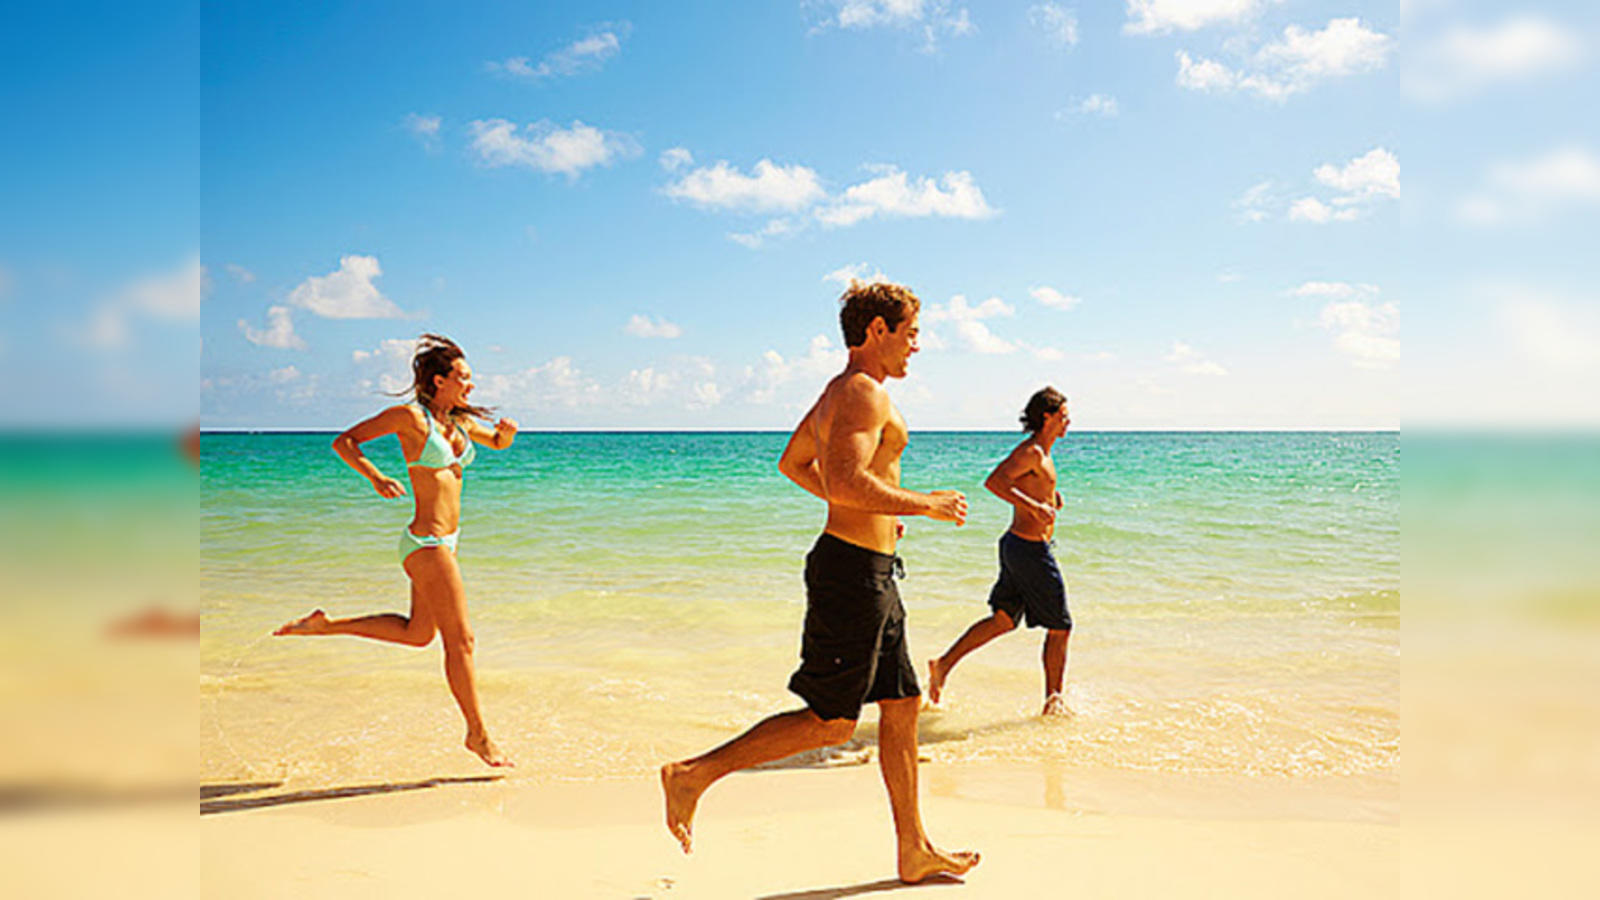 Walking on the beach: 5 benefits of the sand and sea - Women's Fitness